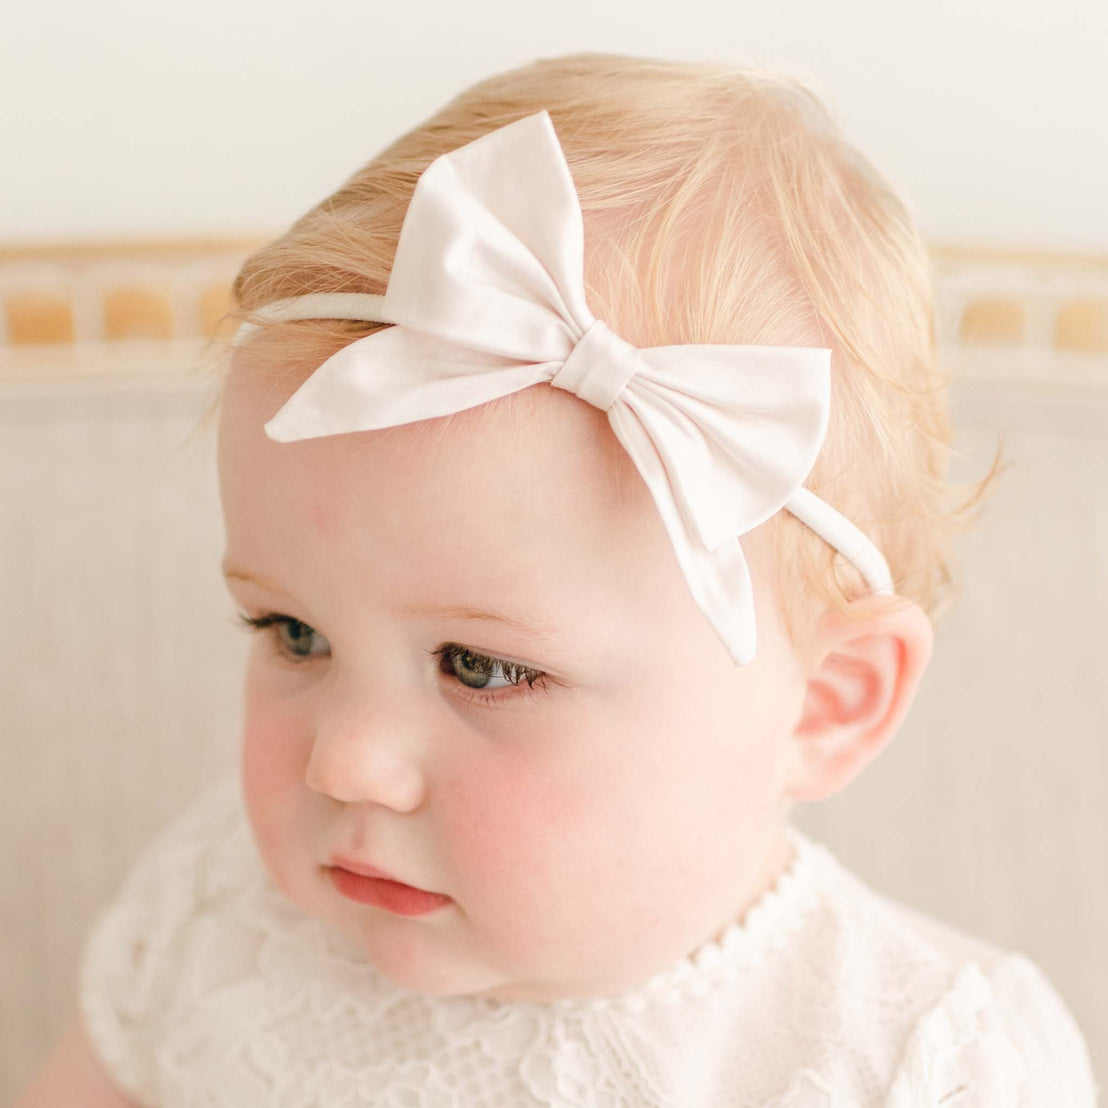 Baby girl wearing the Victoria Pink Bow Headband.